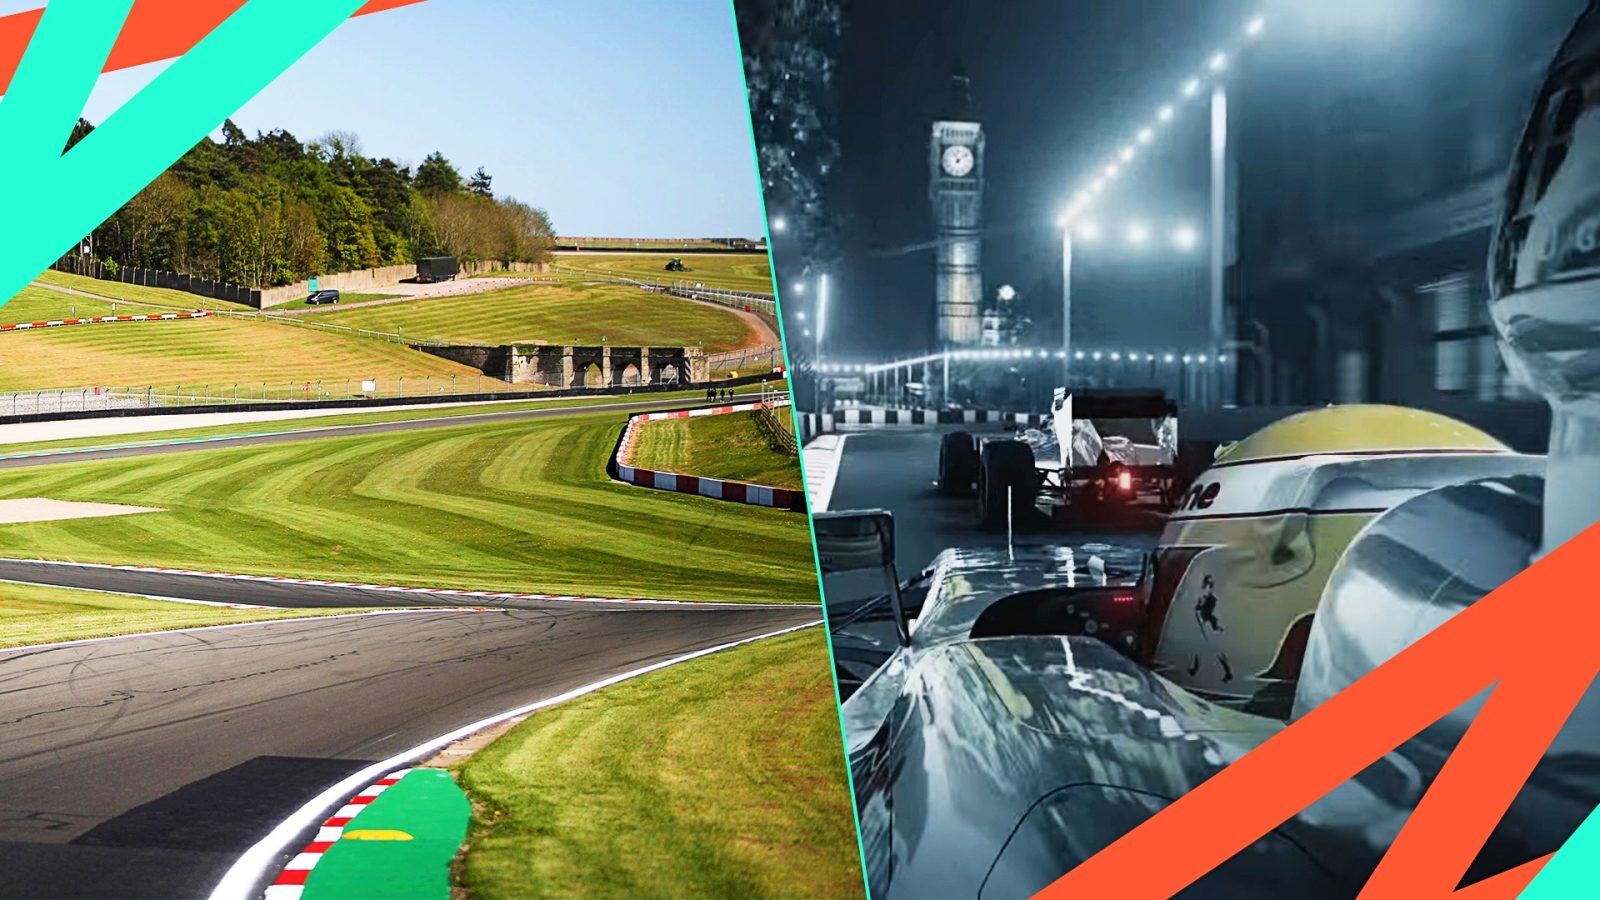 An image of Donnington alongside an image of the prosed London GP circuit.